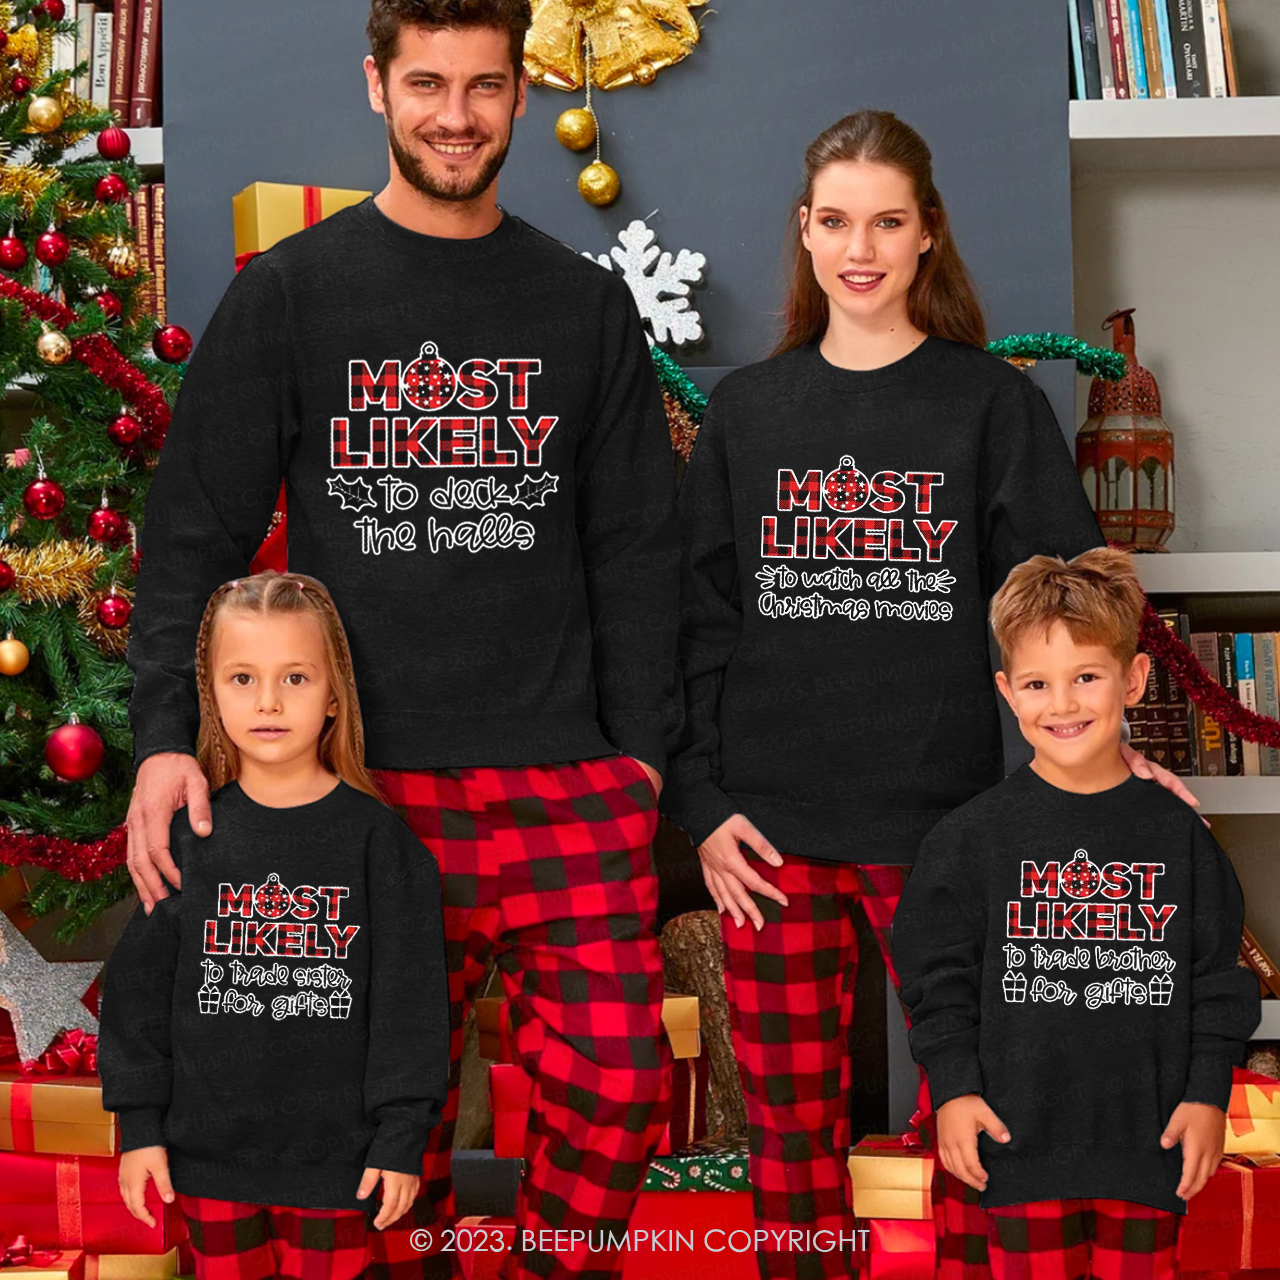 Matching Family Christmas Shirts With Design Most Sweatshirts